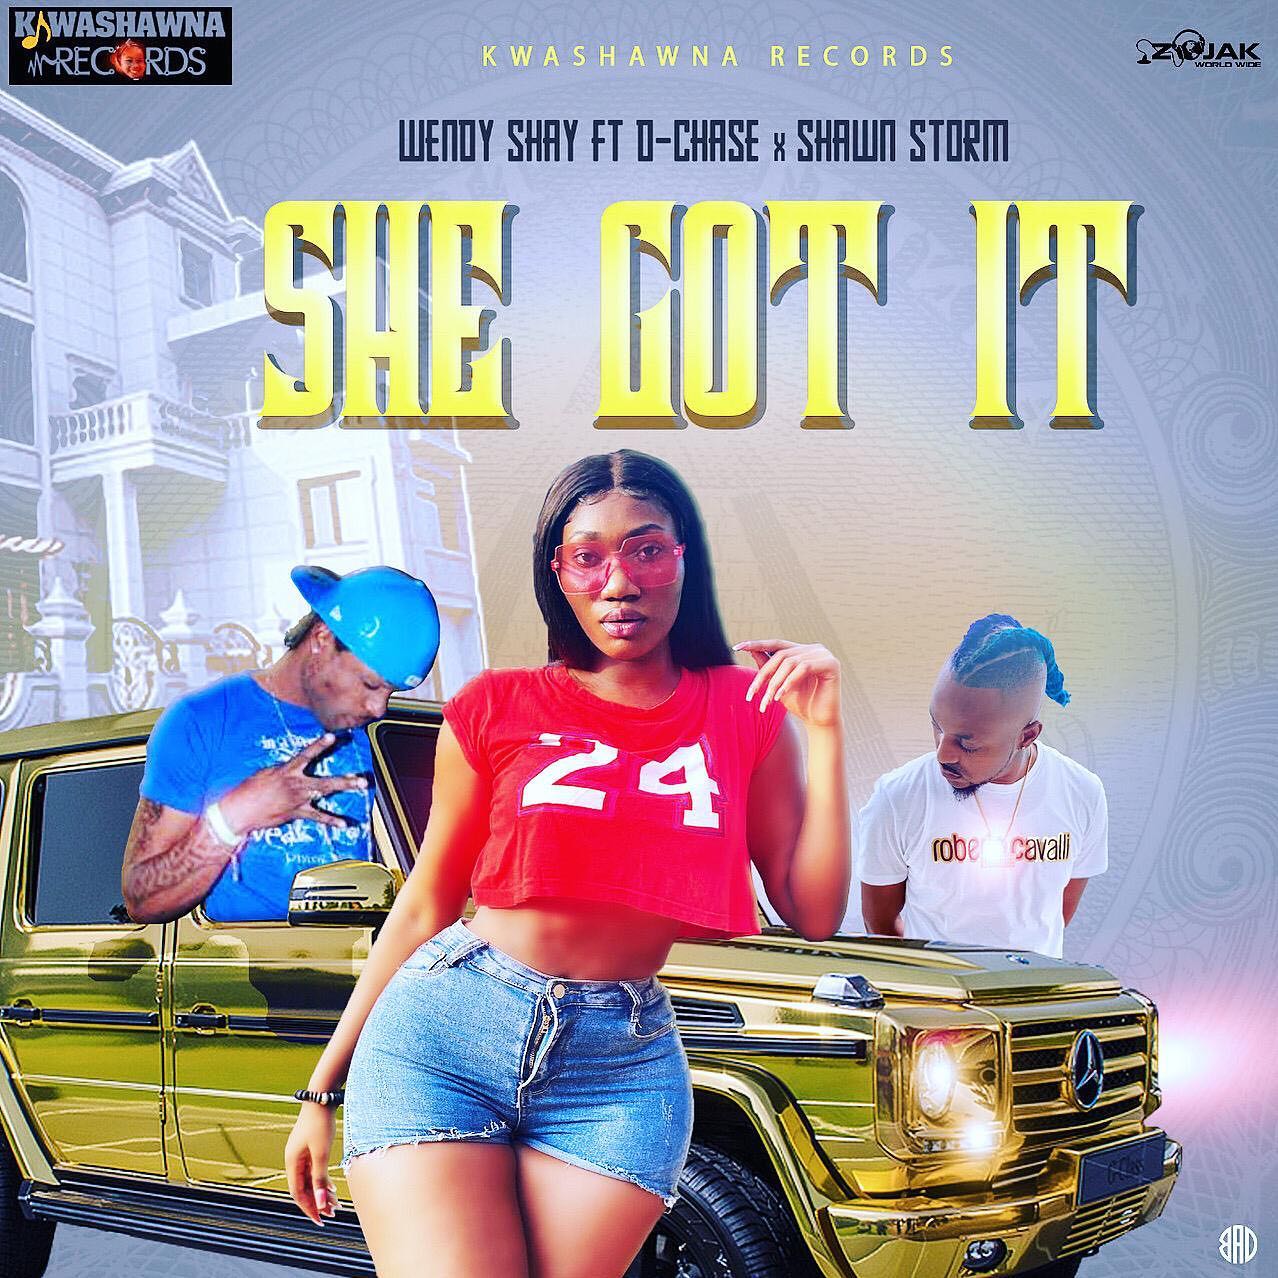 Wendy Shay - She Got It Ft. D-Chase x Shawn Storm